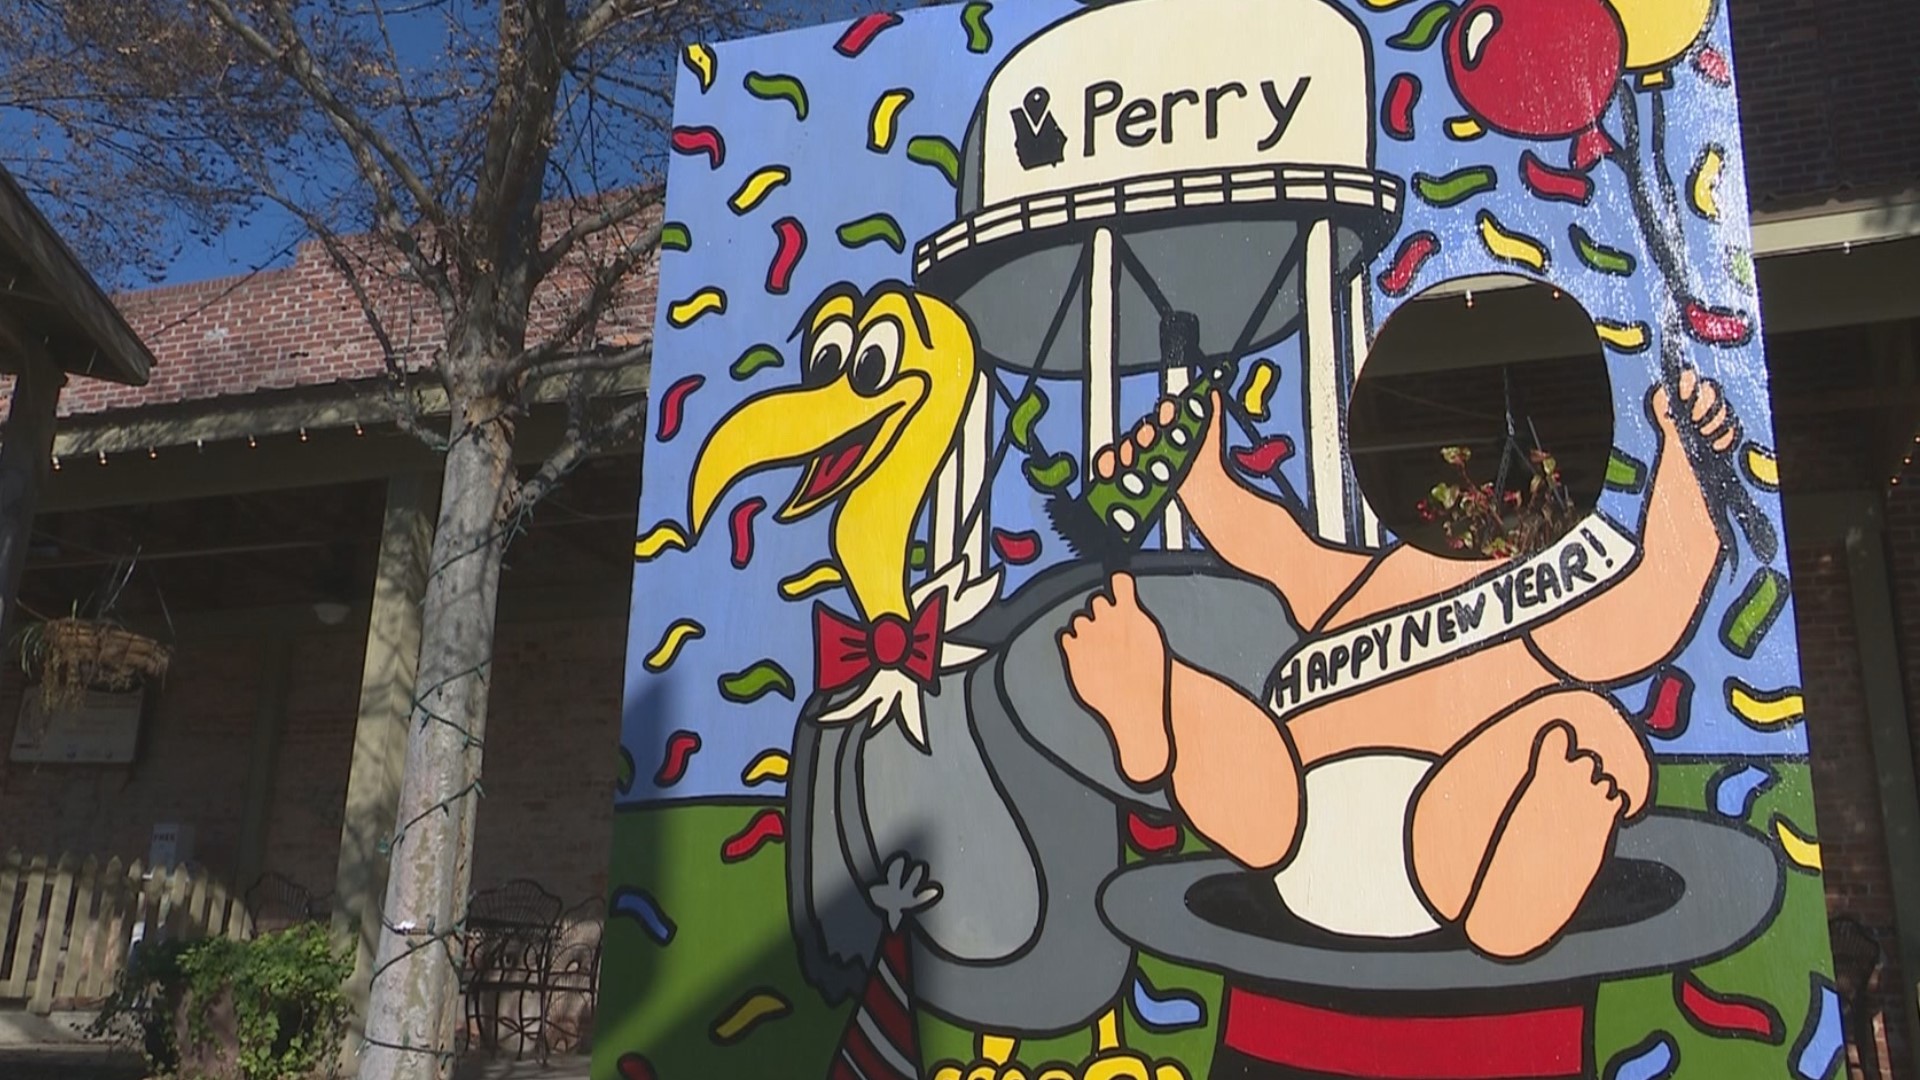 The countdown to 2020 is on and Perry will be celebrating with something unique. This is the 7th year that the people of Perry will watch Bob the Buzzard drop from